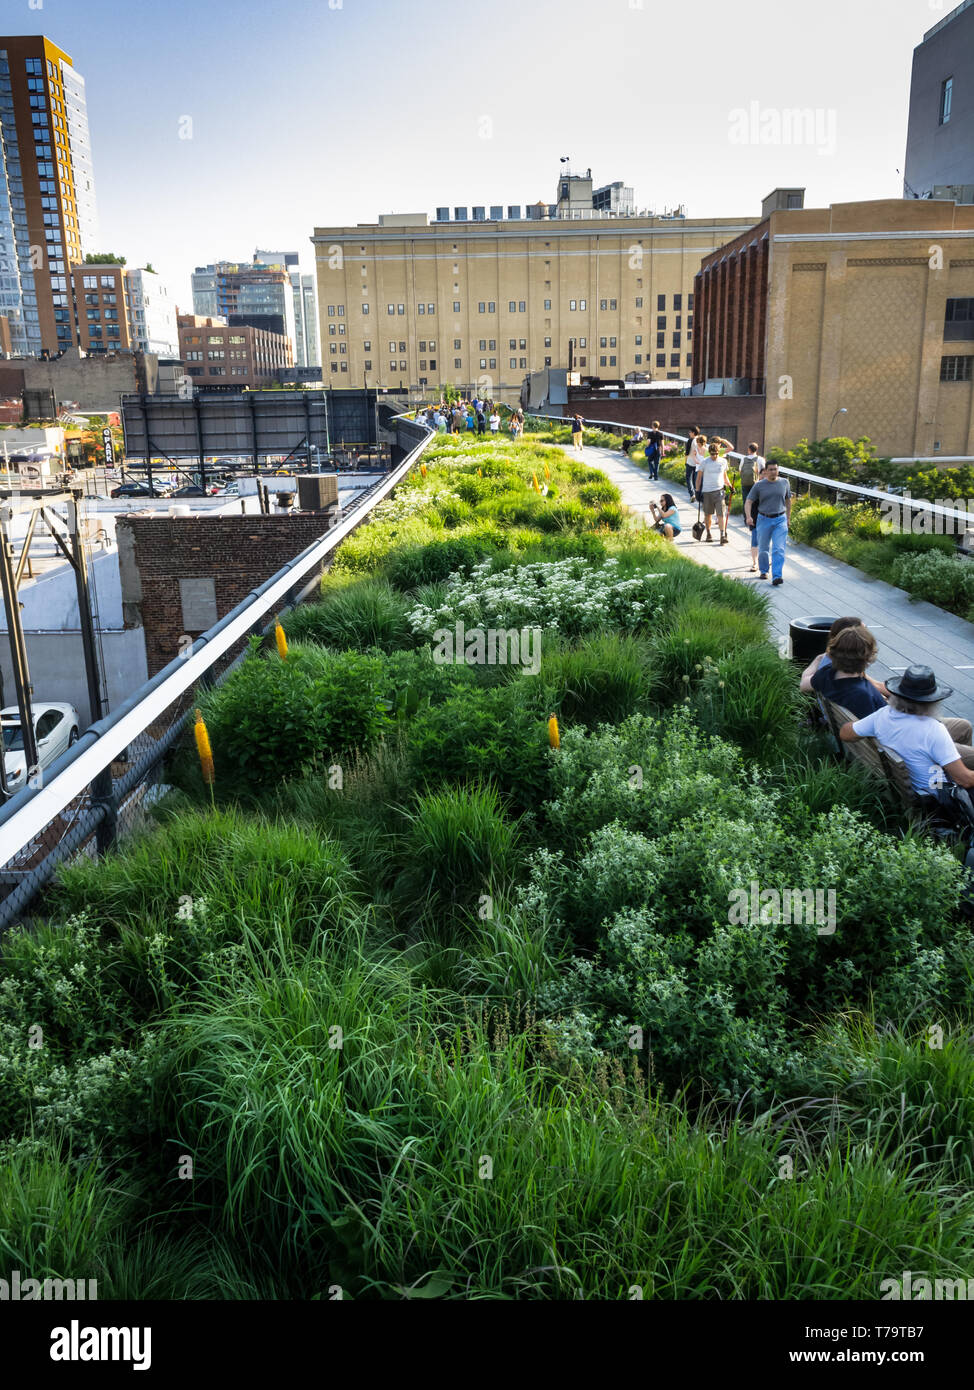 High line pedestrian park and walkway on old elevated train tracks in New York City Stock Photo